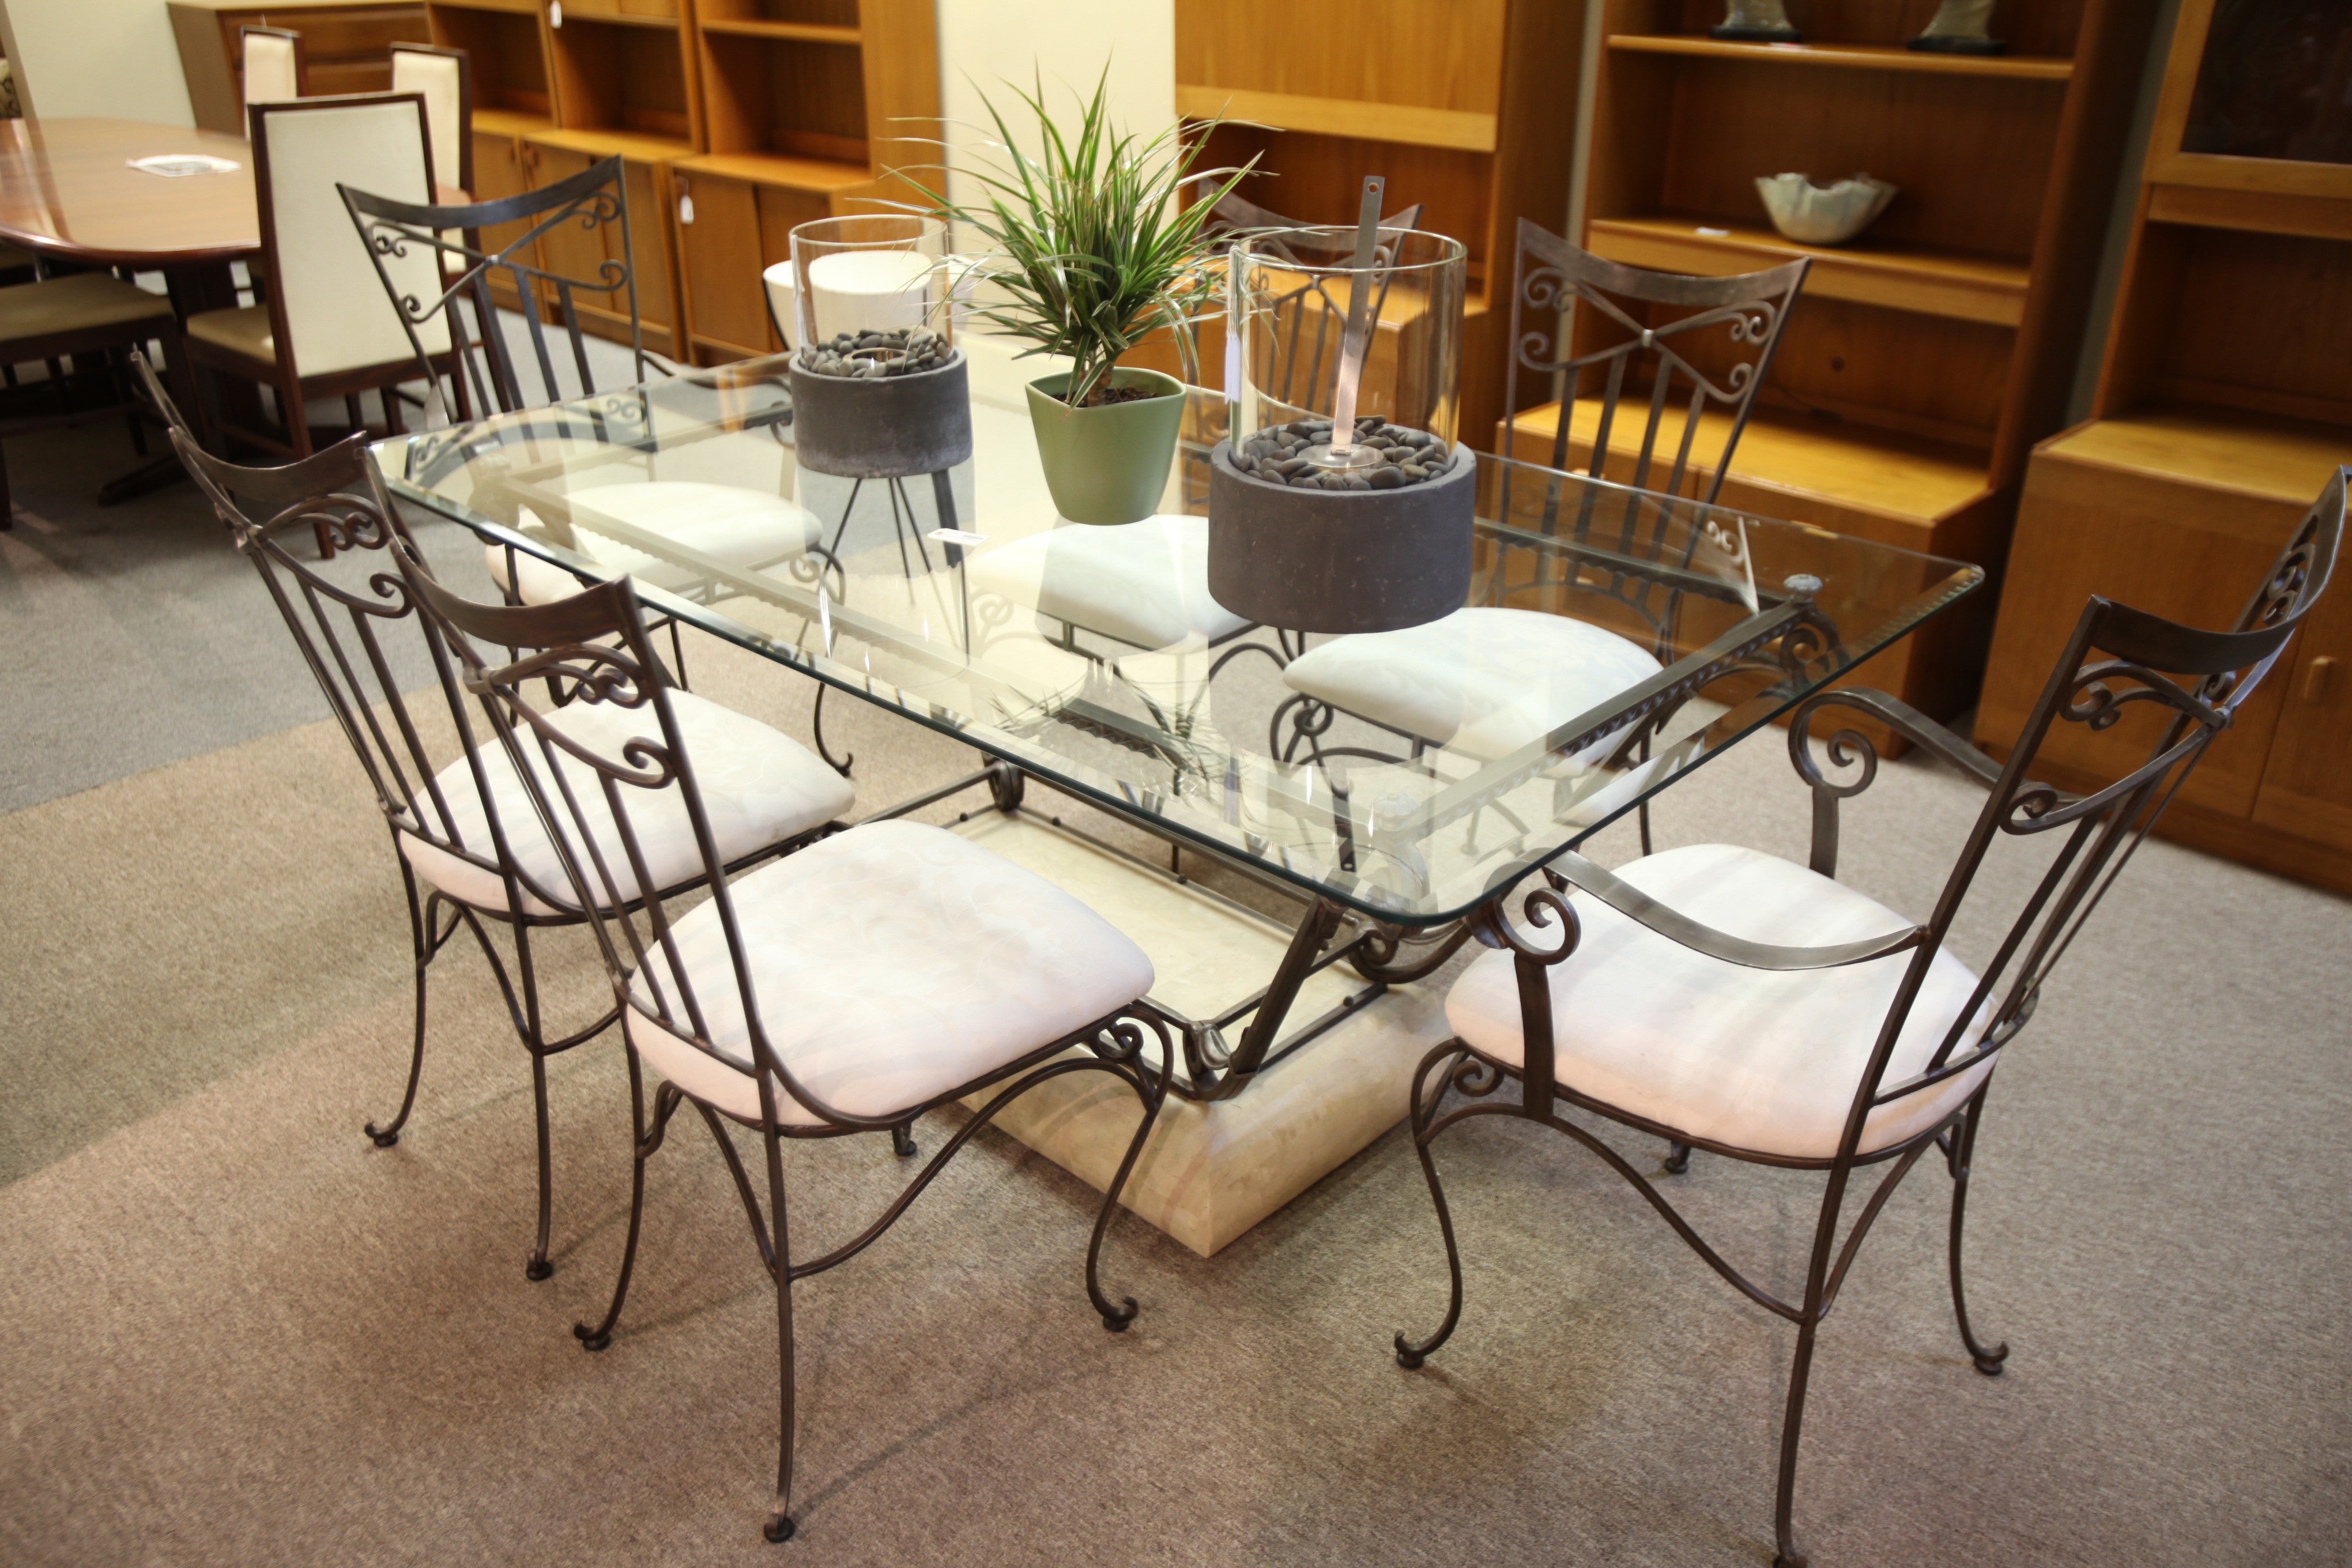 Wrought Iron/Glass Table with 6 Chairs (72"x41.5")